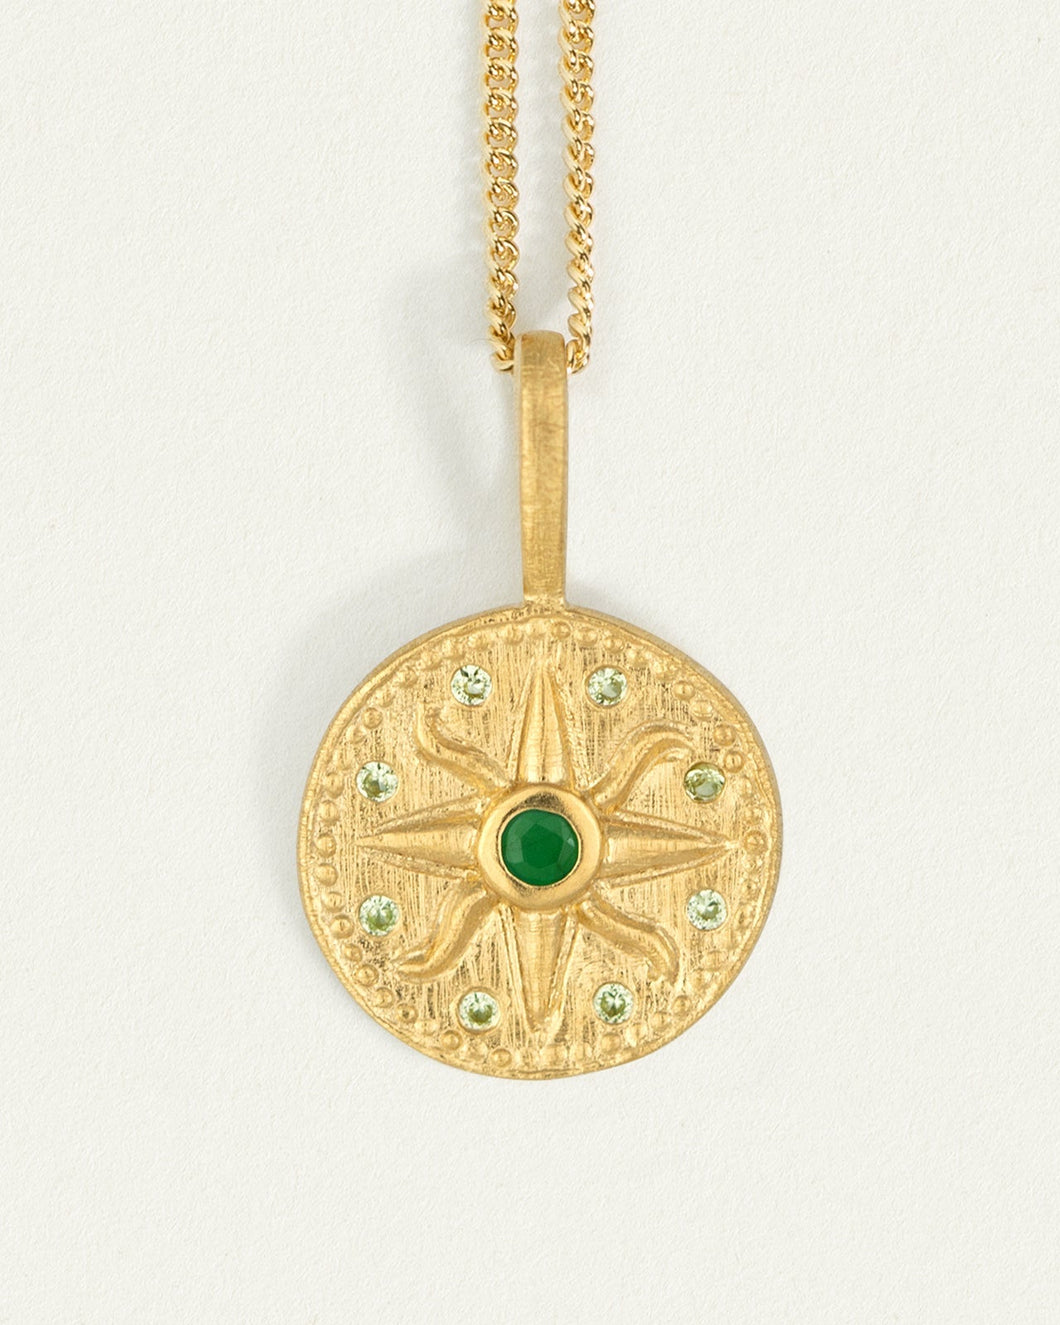 TEMPLE OF THE SUN: SOLANA NECKLACE - GOLD